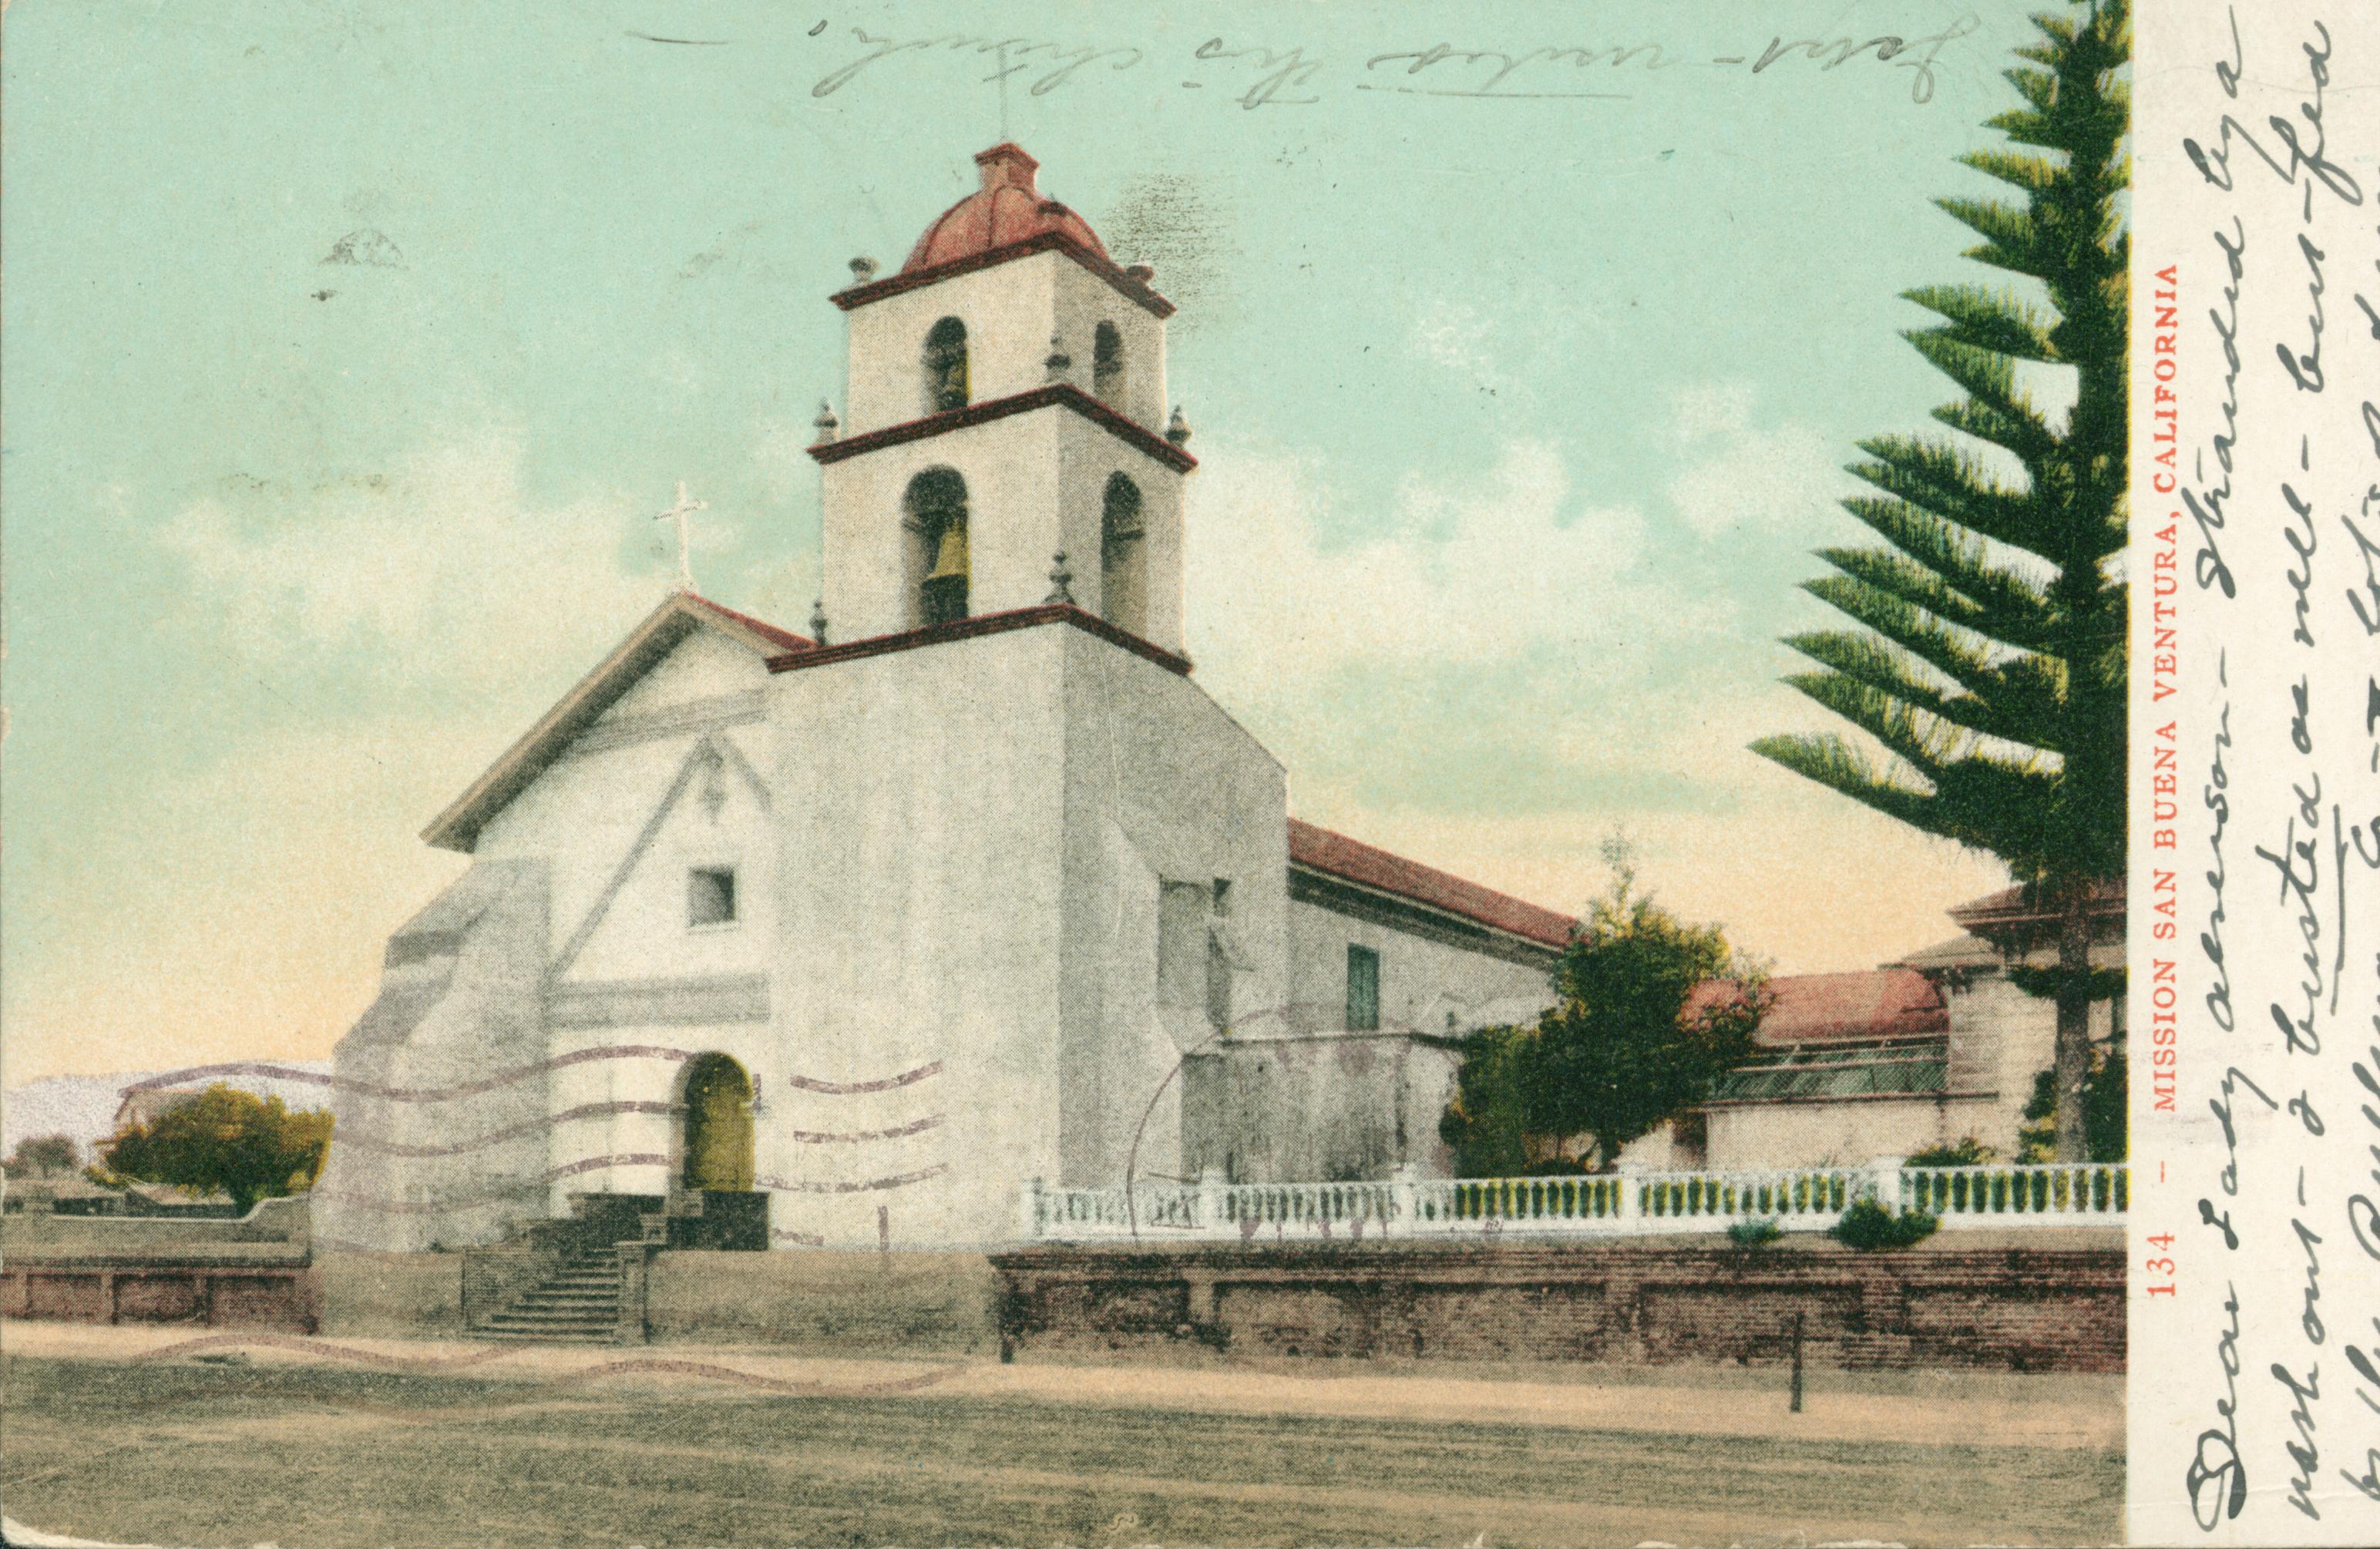 Shows the exterior of the San Buenaventura mission church